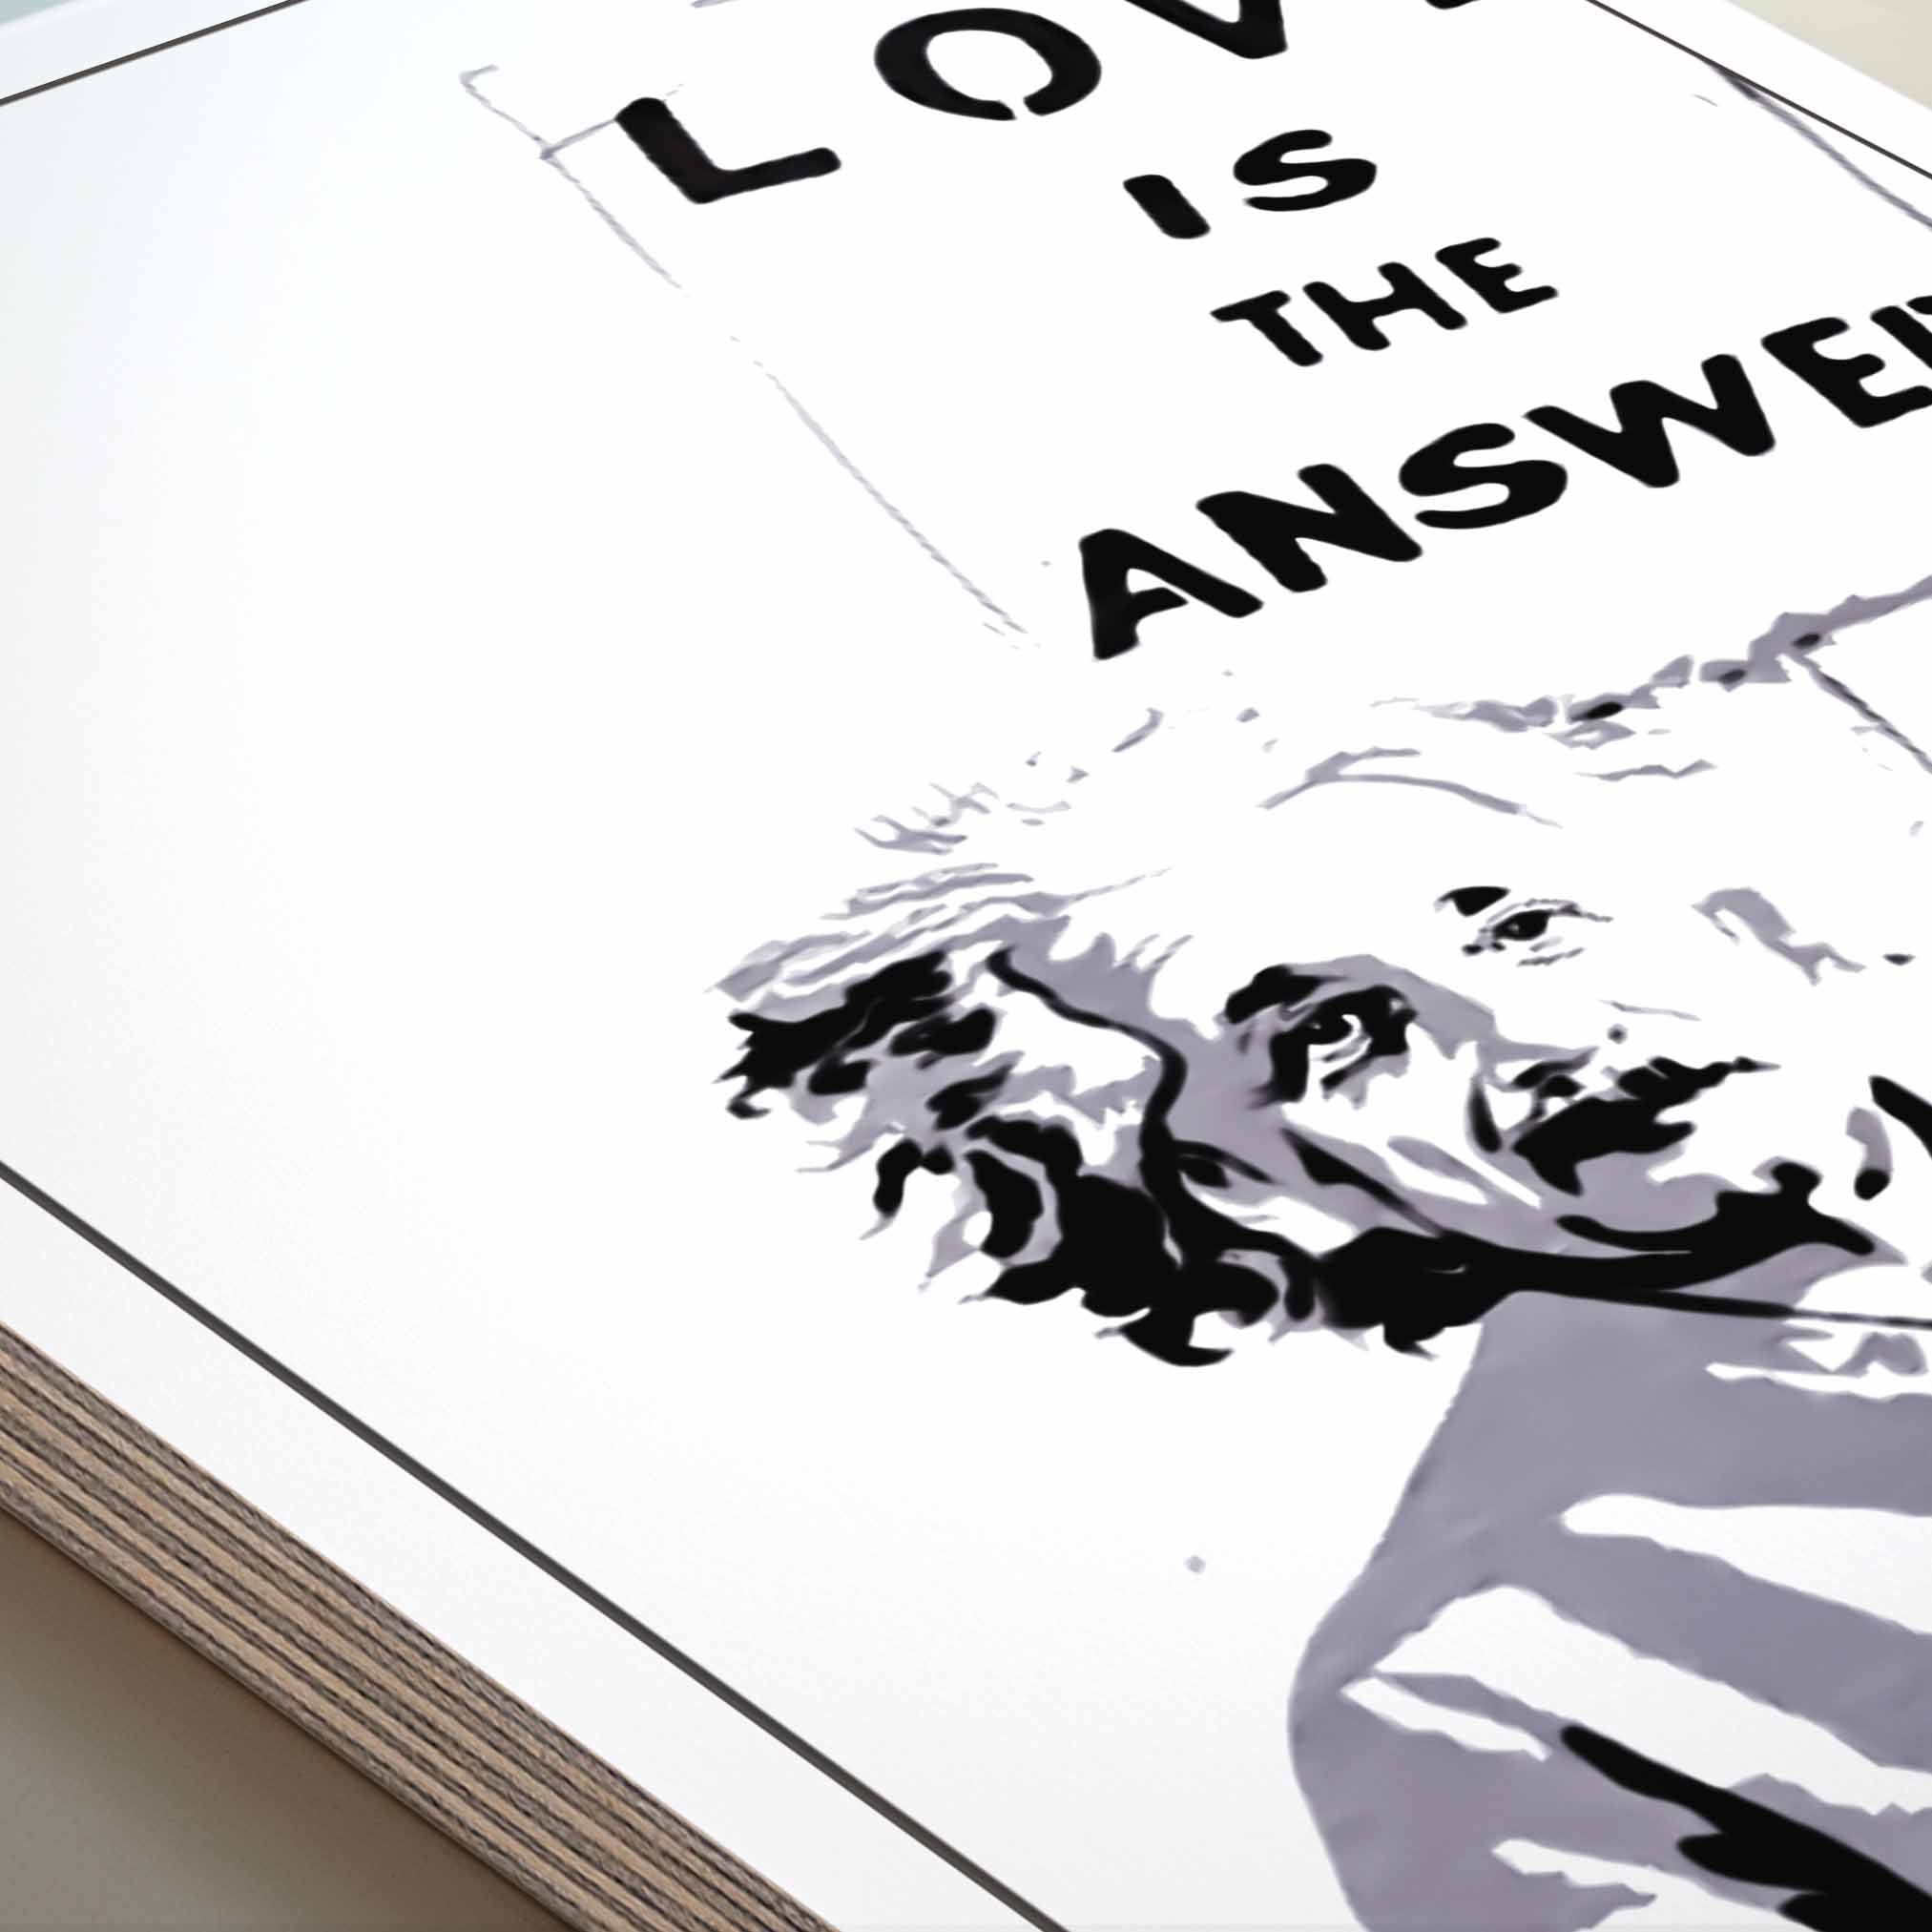 BANKSY - Love is the answer